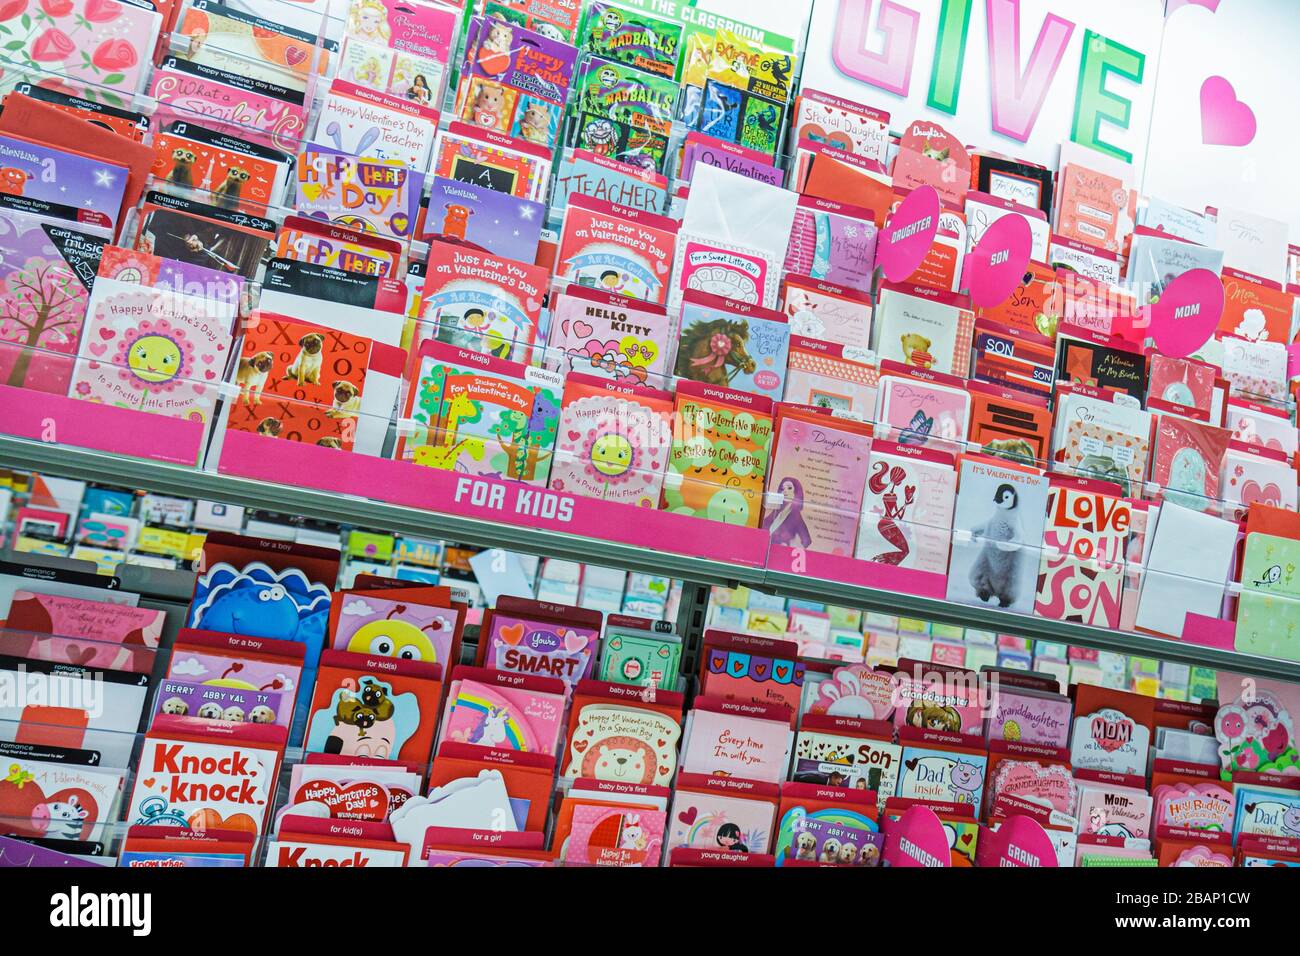 Miami Florida,Midtown,Target,discount department store,display case sale,greeting cards,FL110116018 Stock Photo